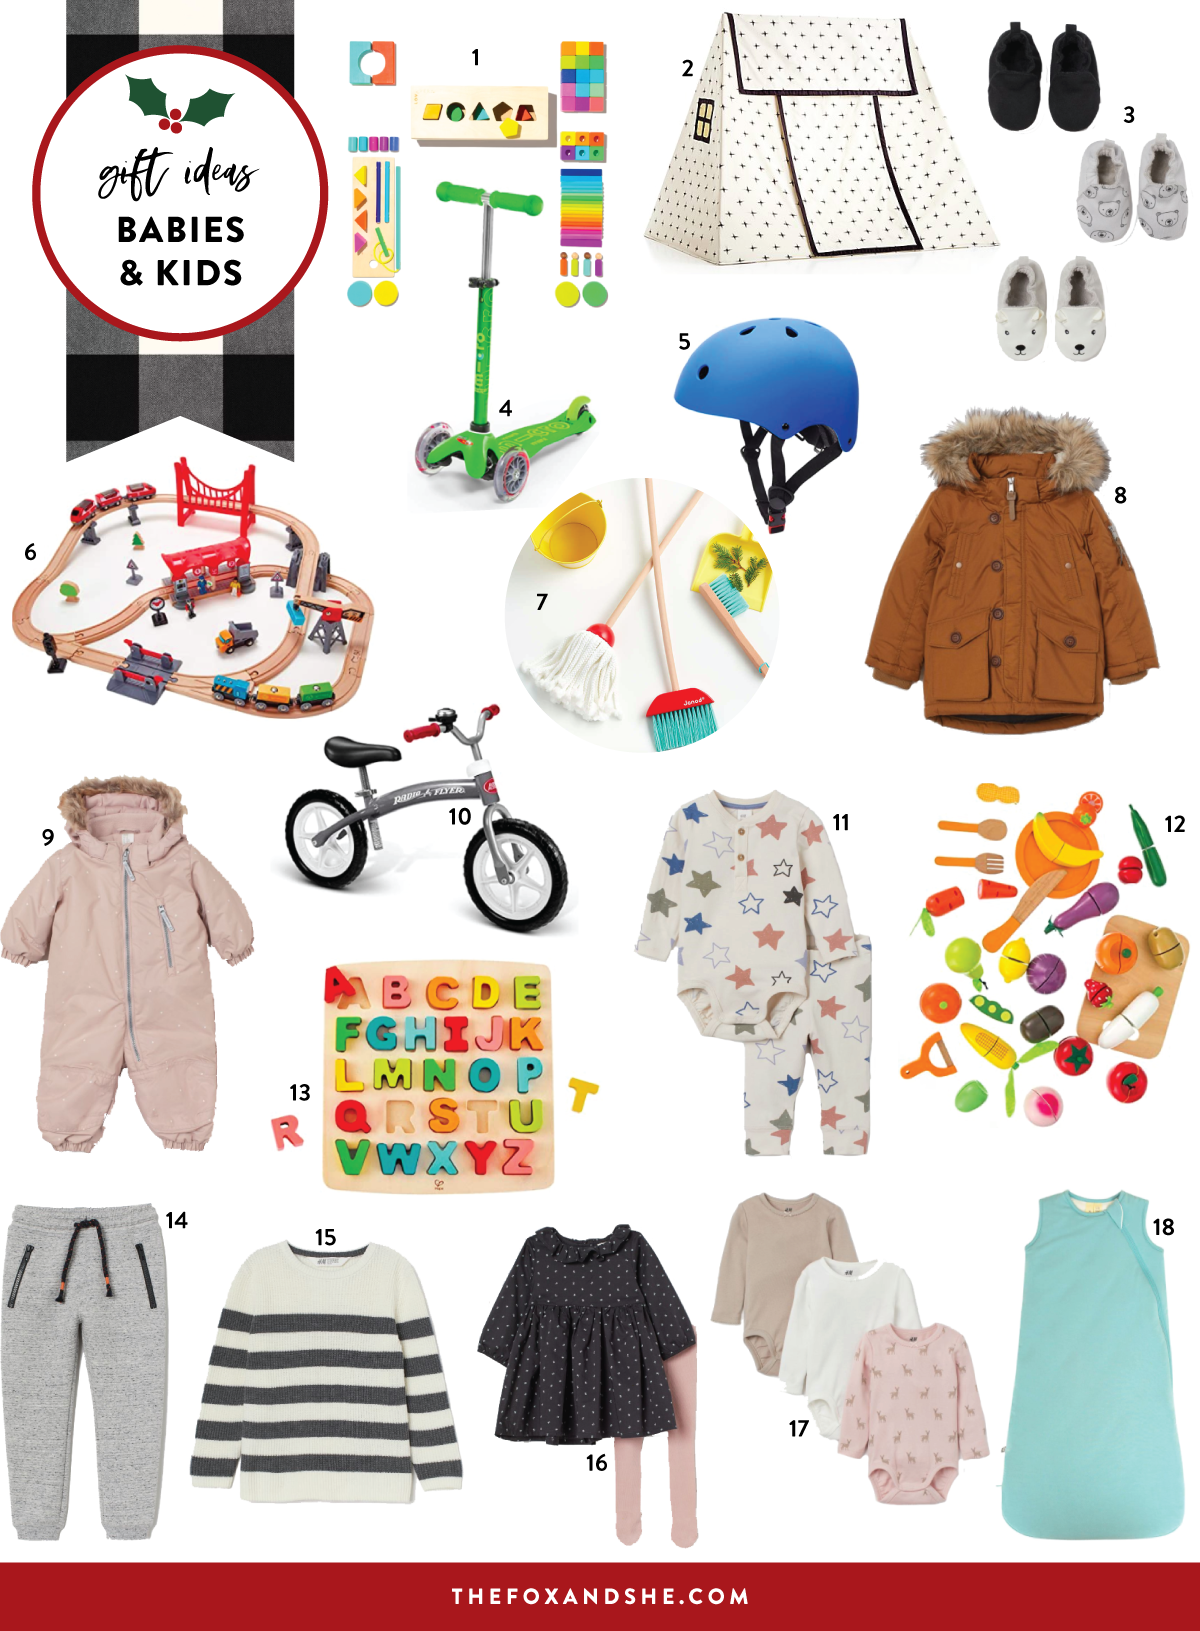 gift guide ideas for kids and babies